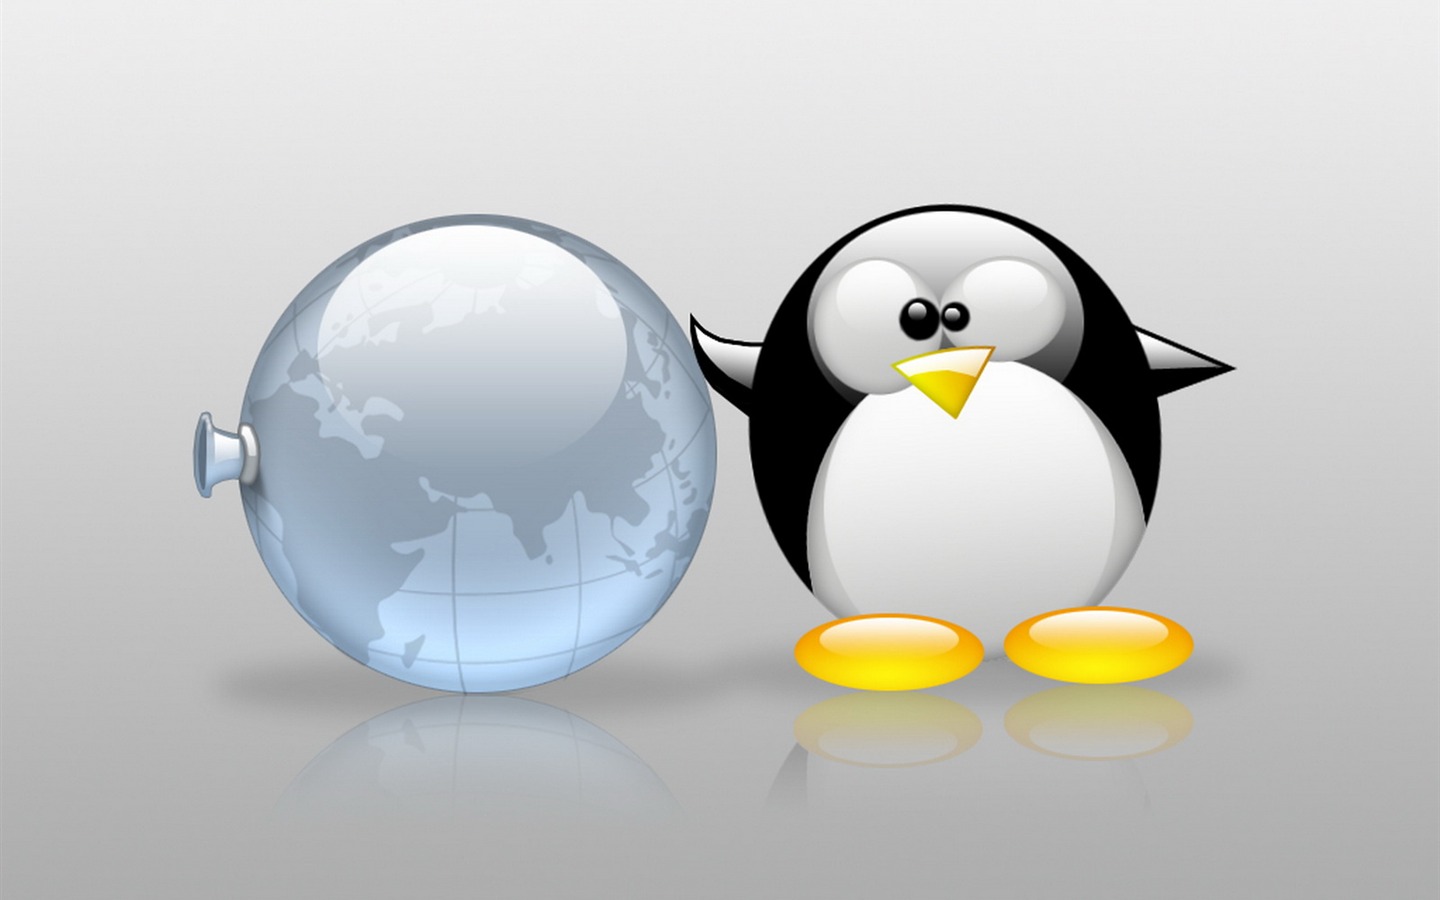 Linux tapety (2) #16 - 1440x900